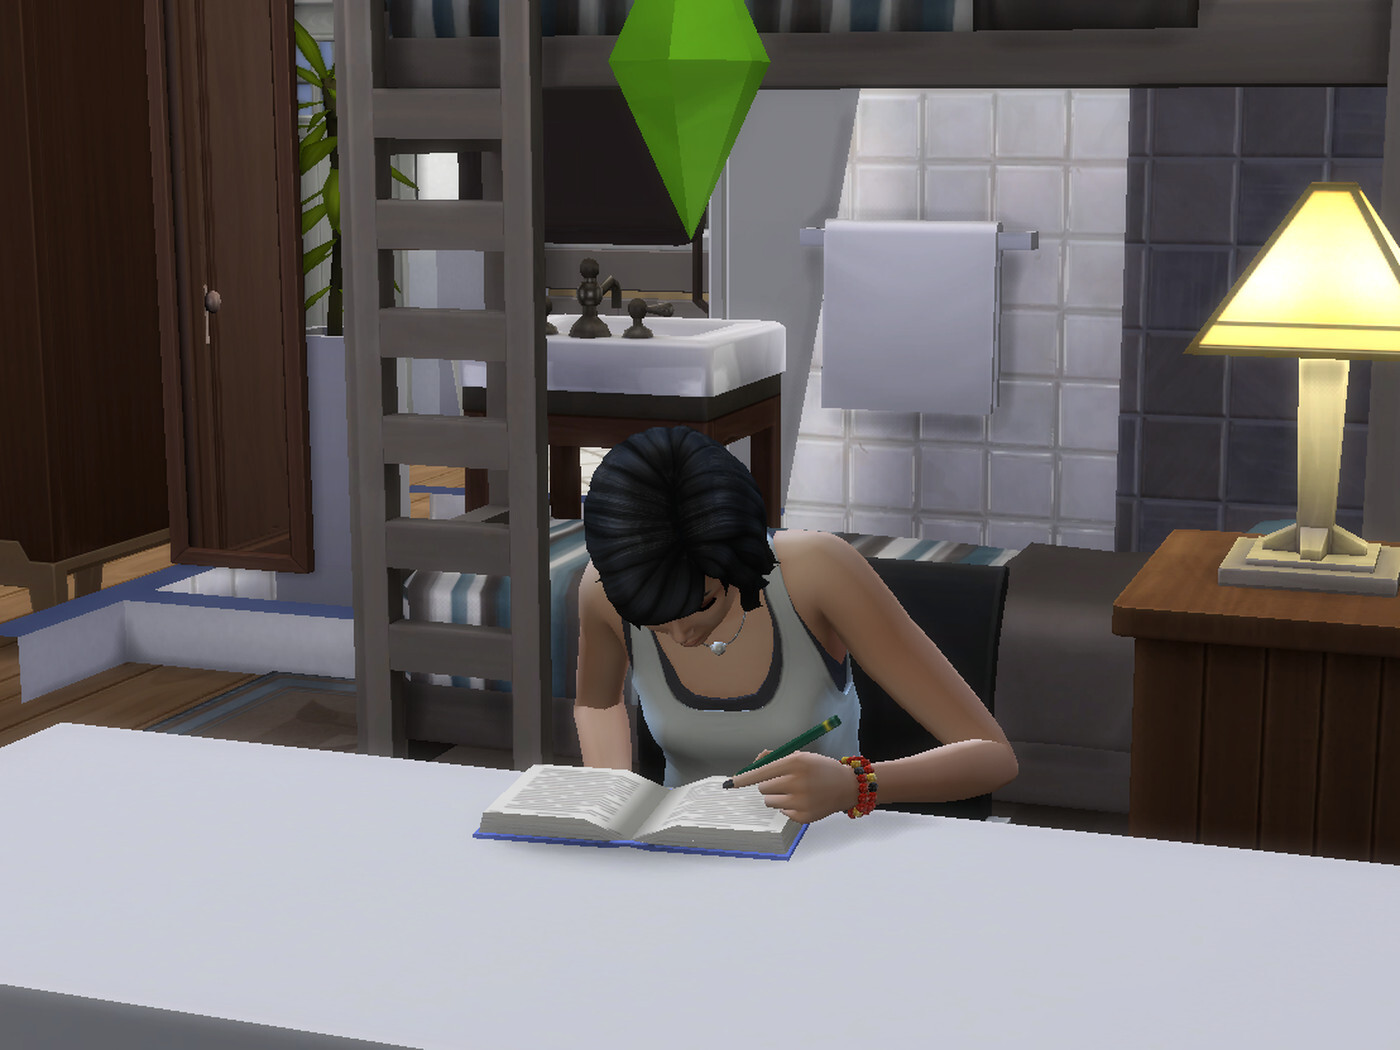 How To Complete Homework In Sims 4